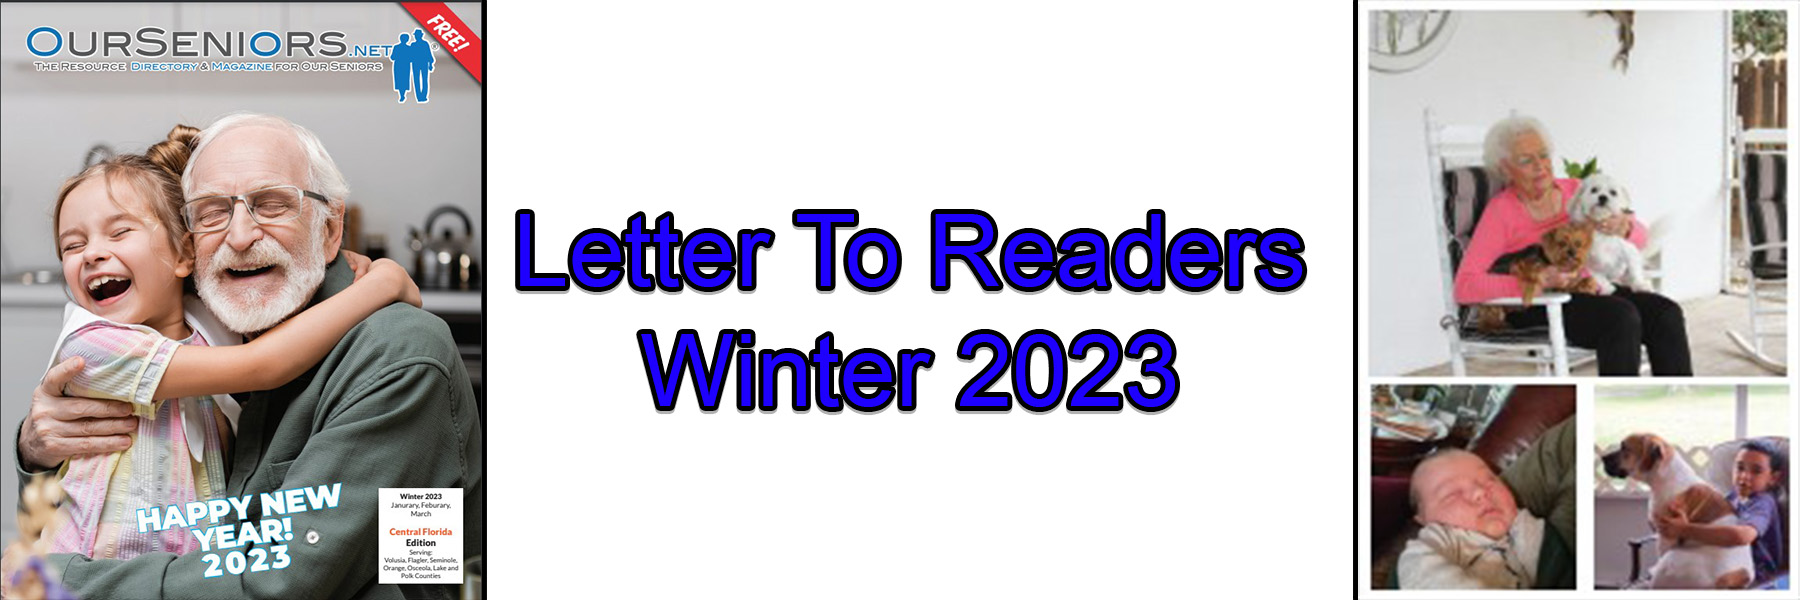 Letter To Readers - Winter 2023